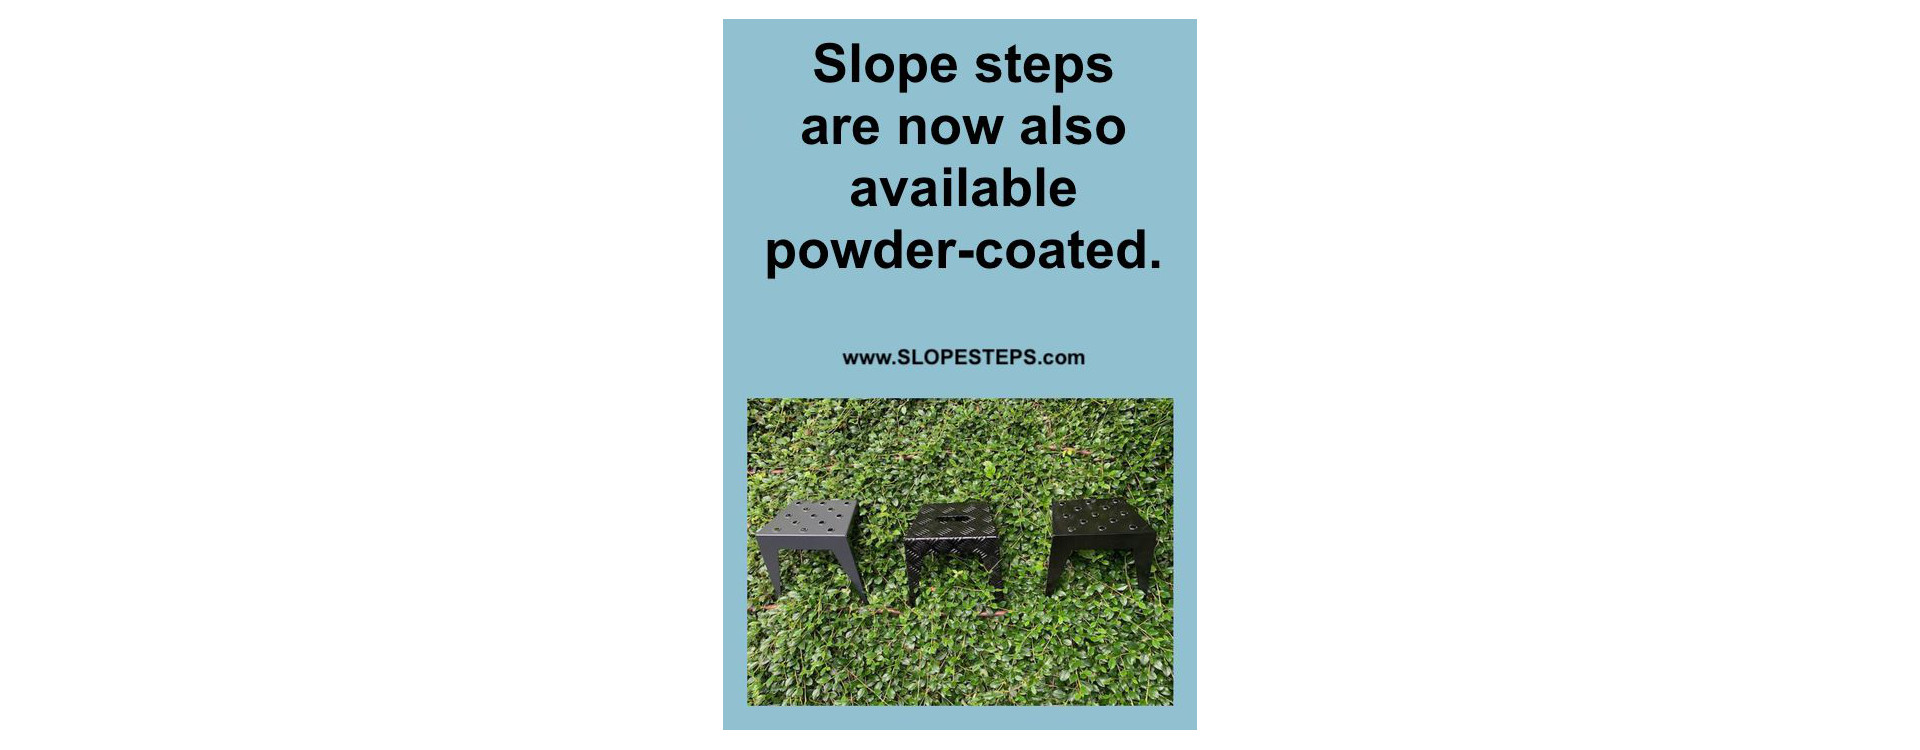 Slope steps are now also available powder-coated!